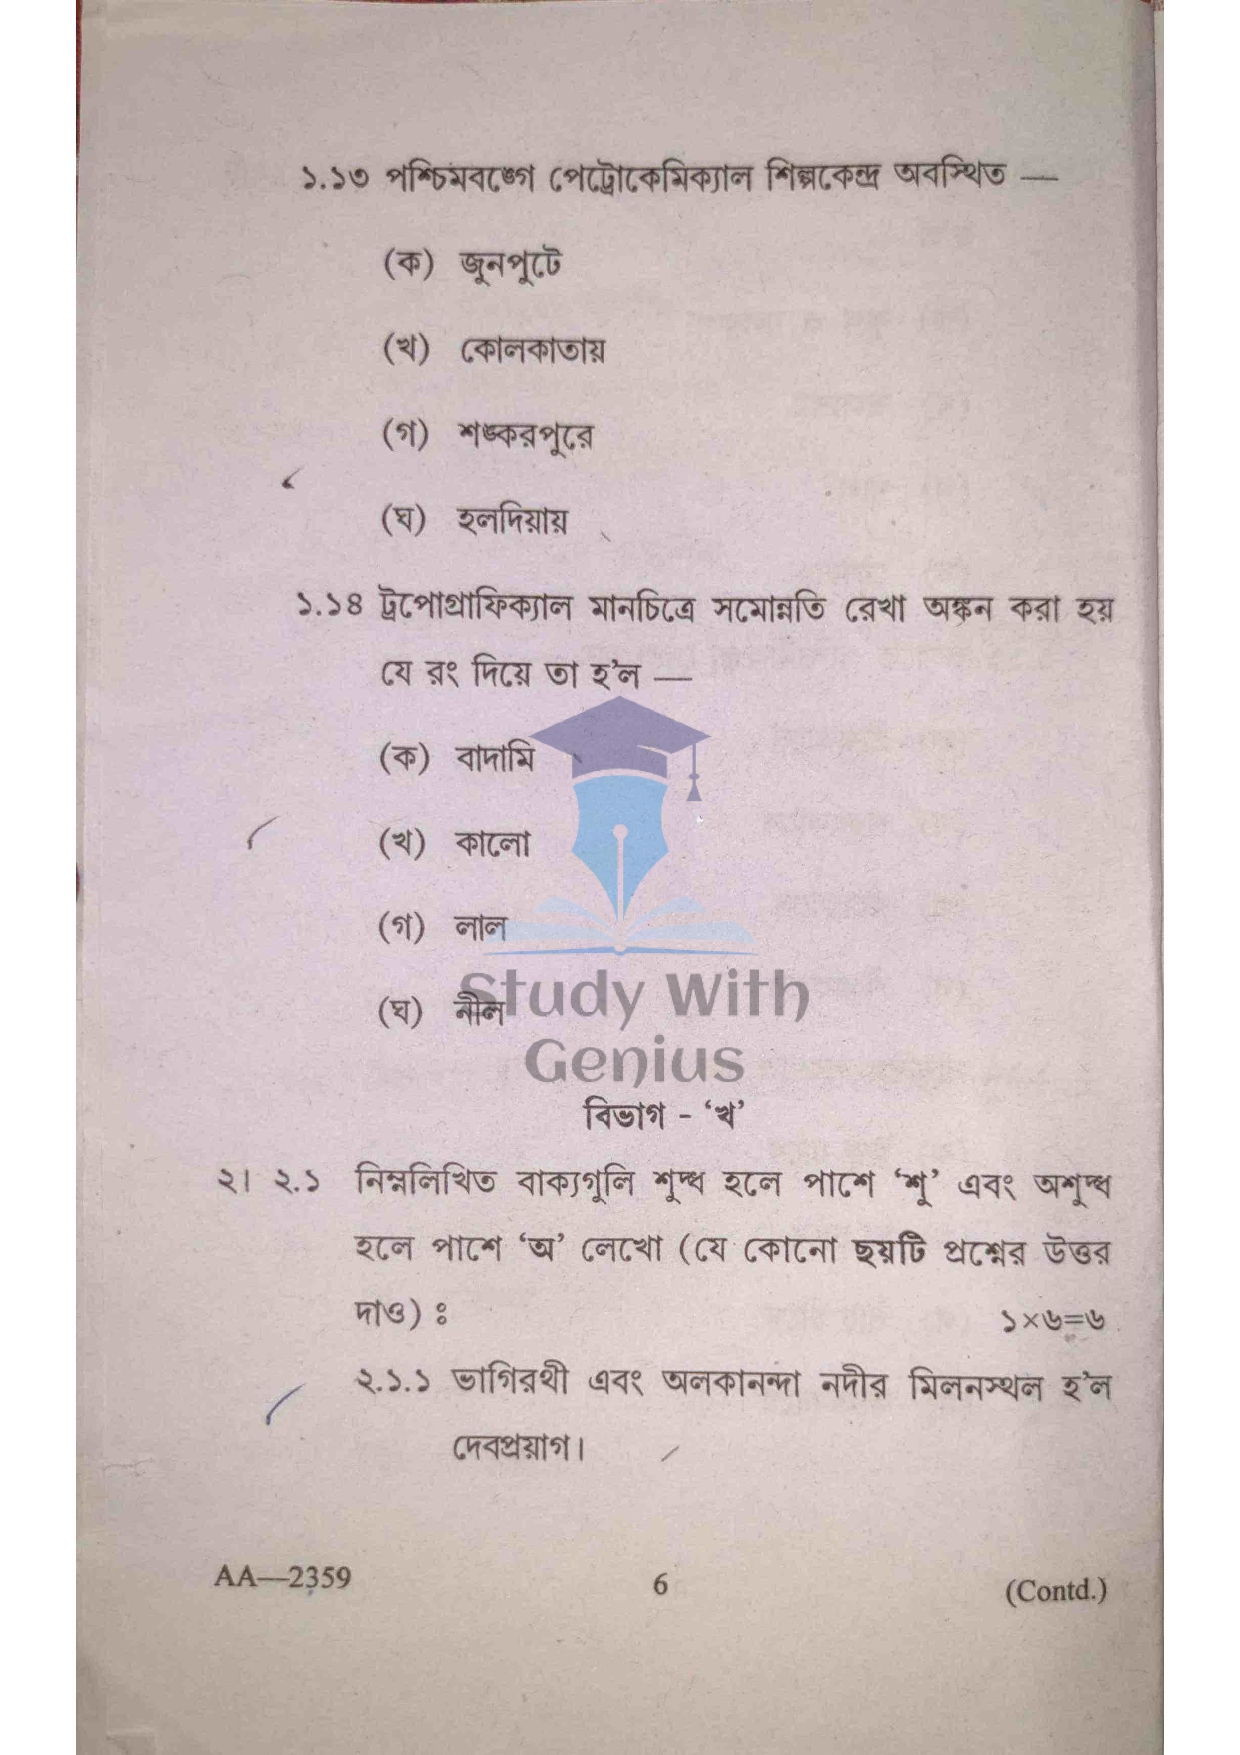 WBBSE Madhyamika Geography Subject Question Papers Bengali Medium 2020